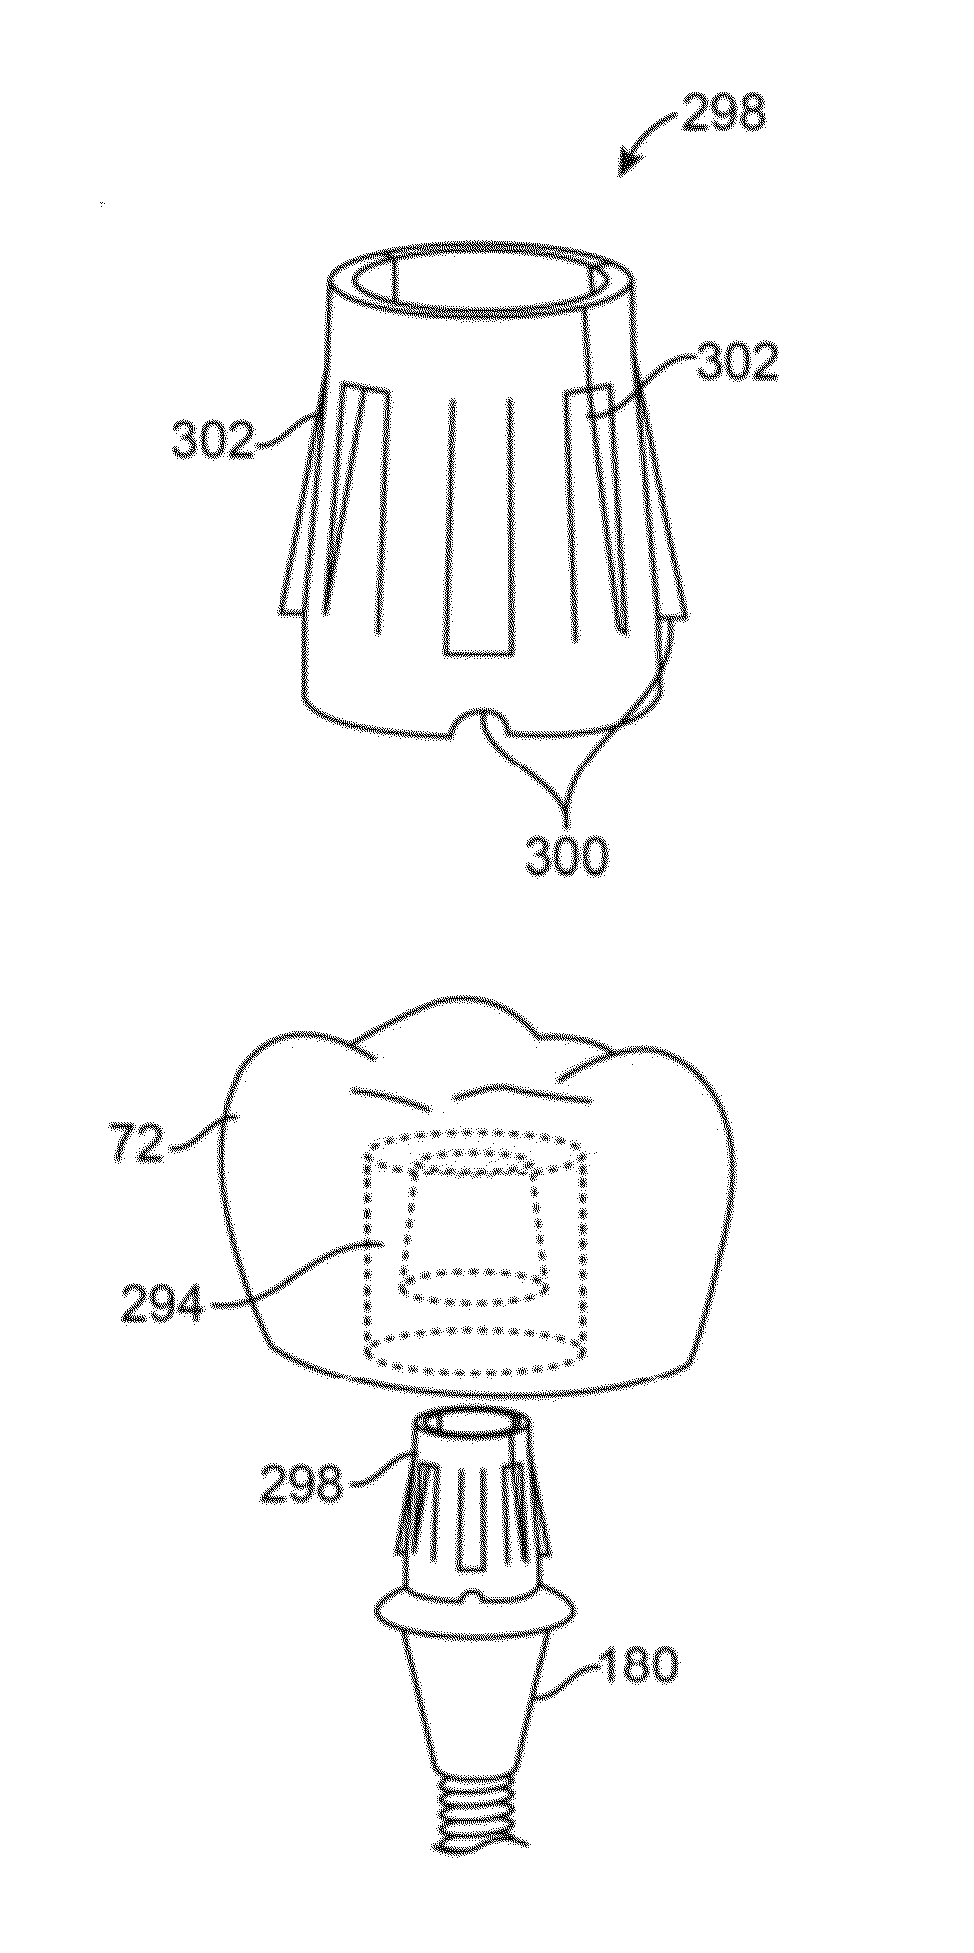 Abutment devices and methods for natural teeth